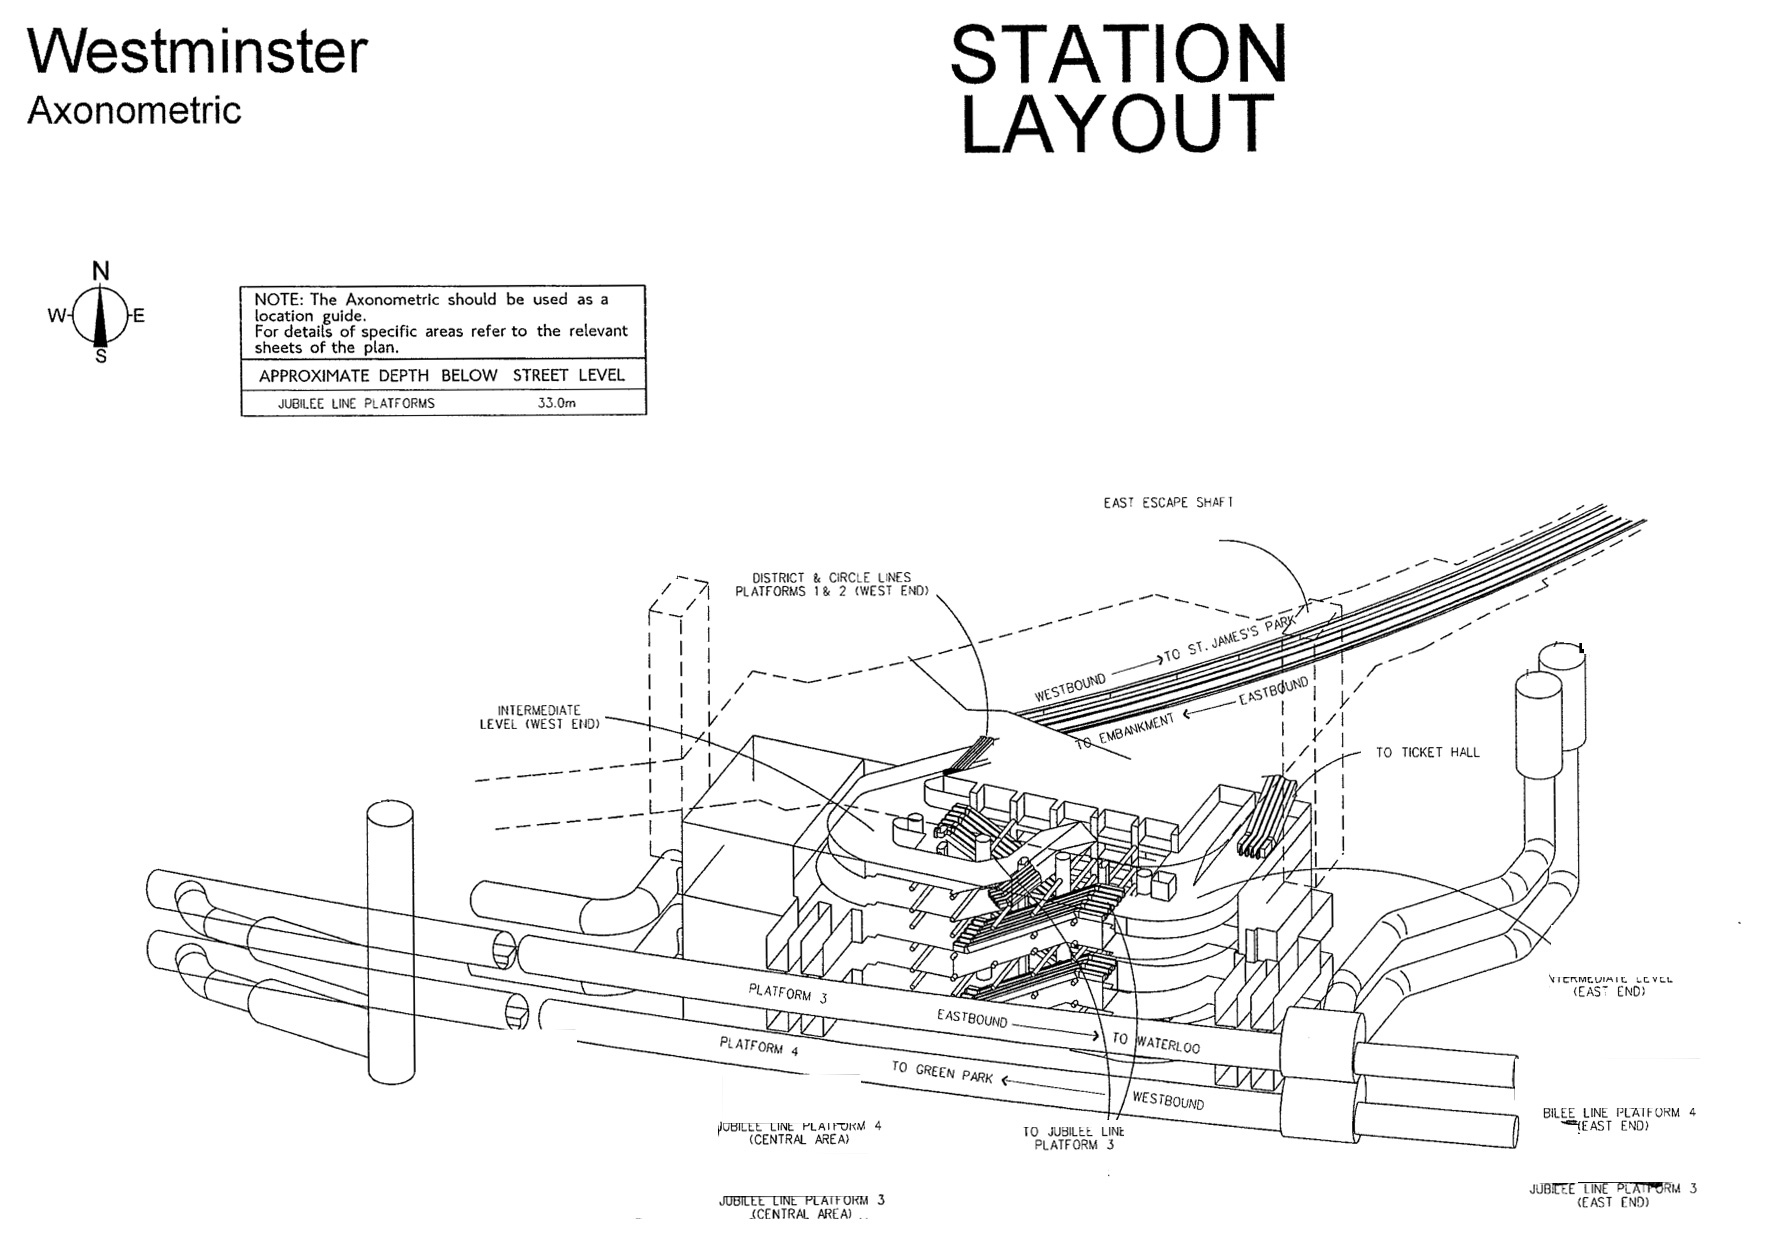 diagramme-3d-station-metro-londres-westminster-01